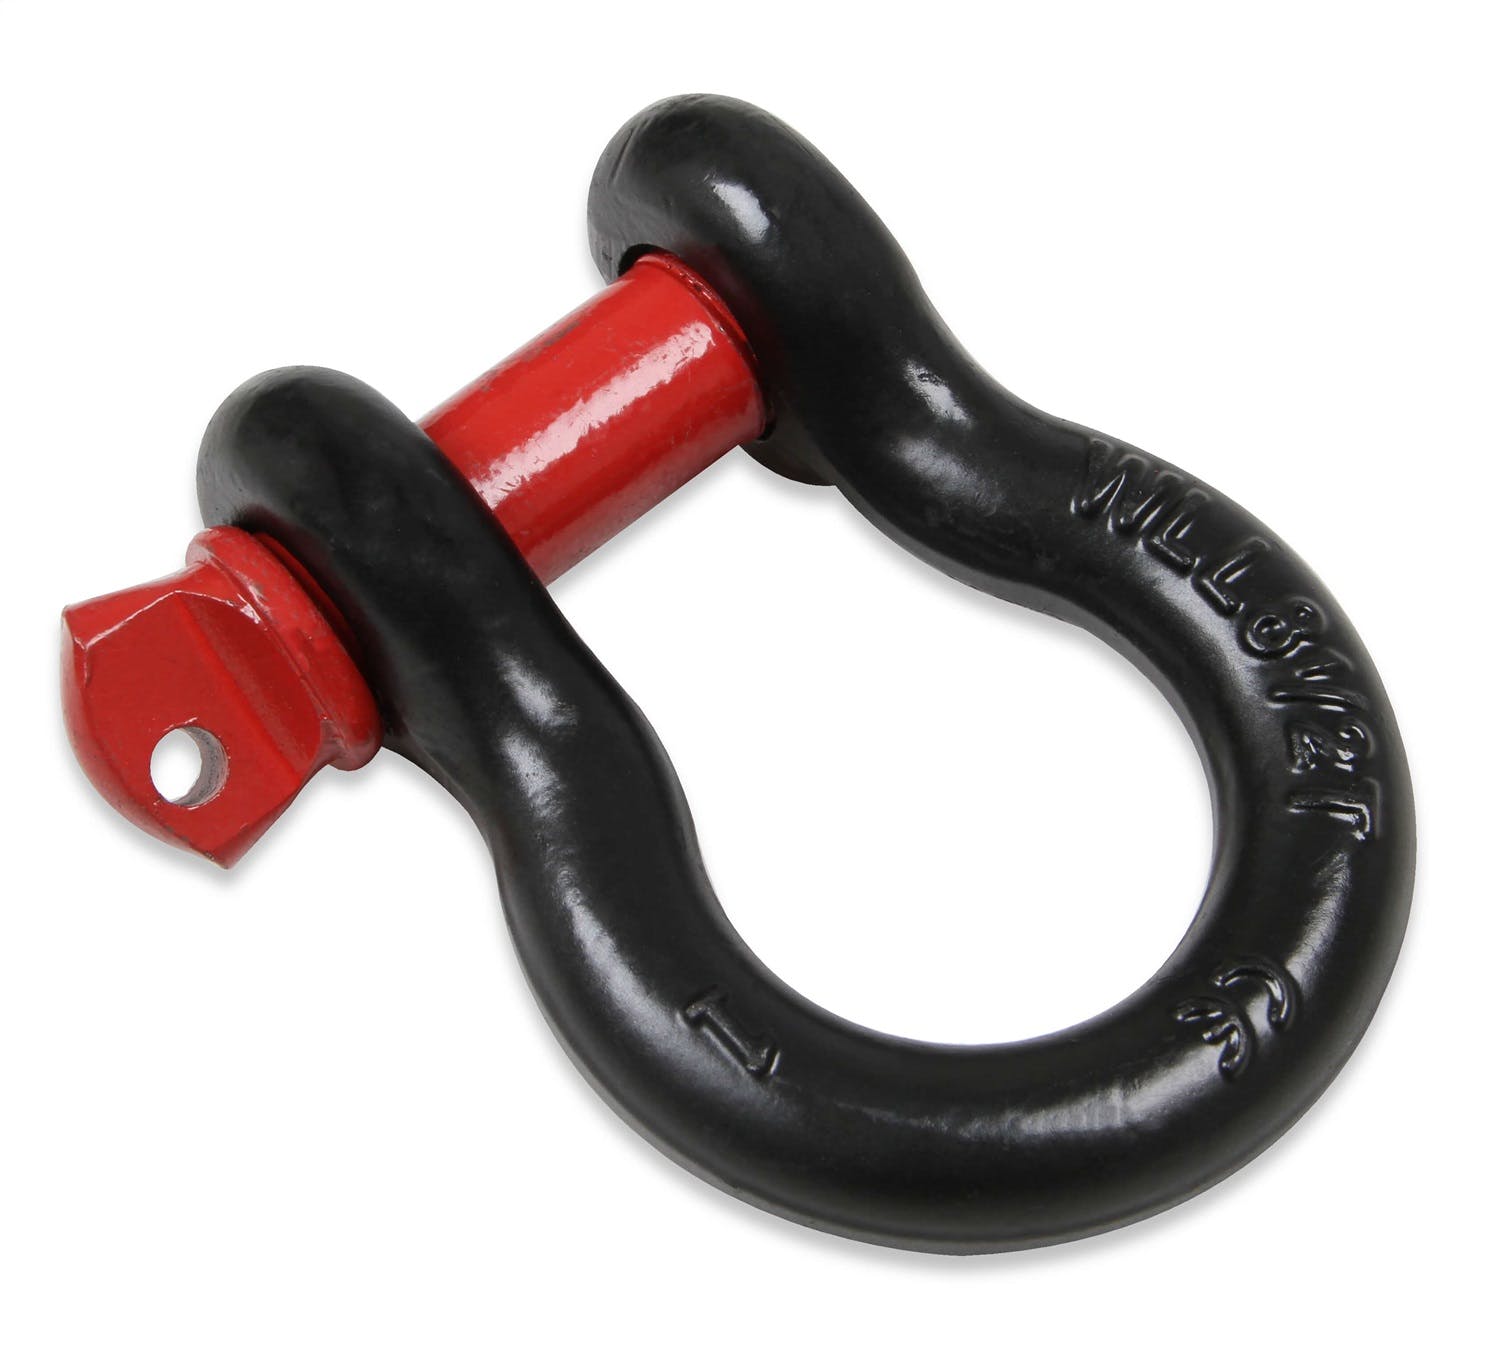 Anvil Off-Road 1090AOR BOW SHACKLE 1 IN. 16K LBS BLACK